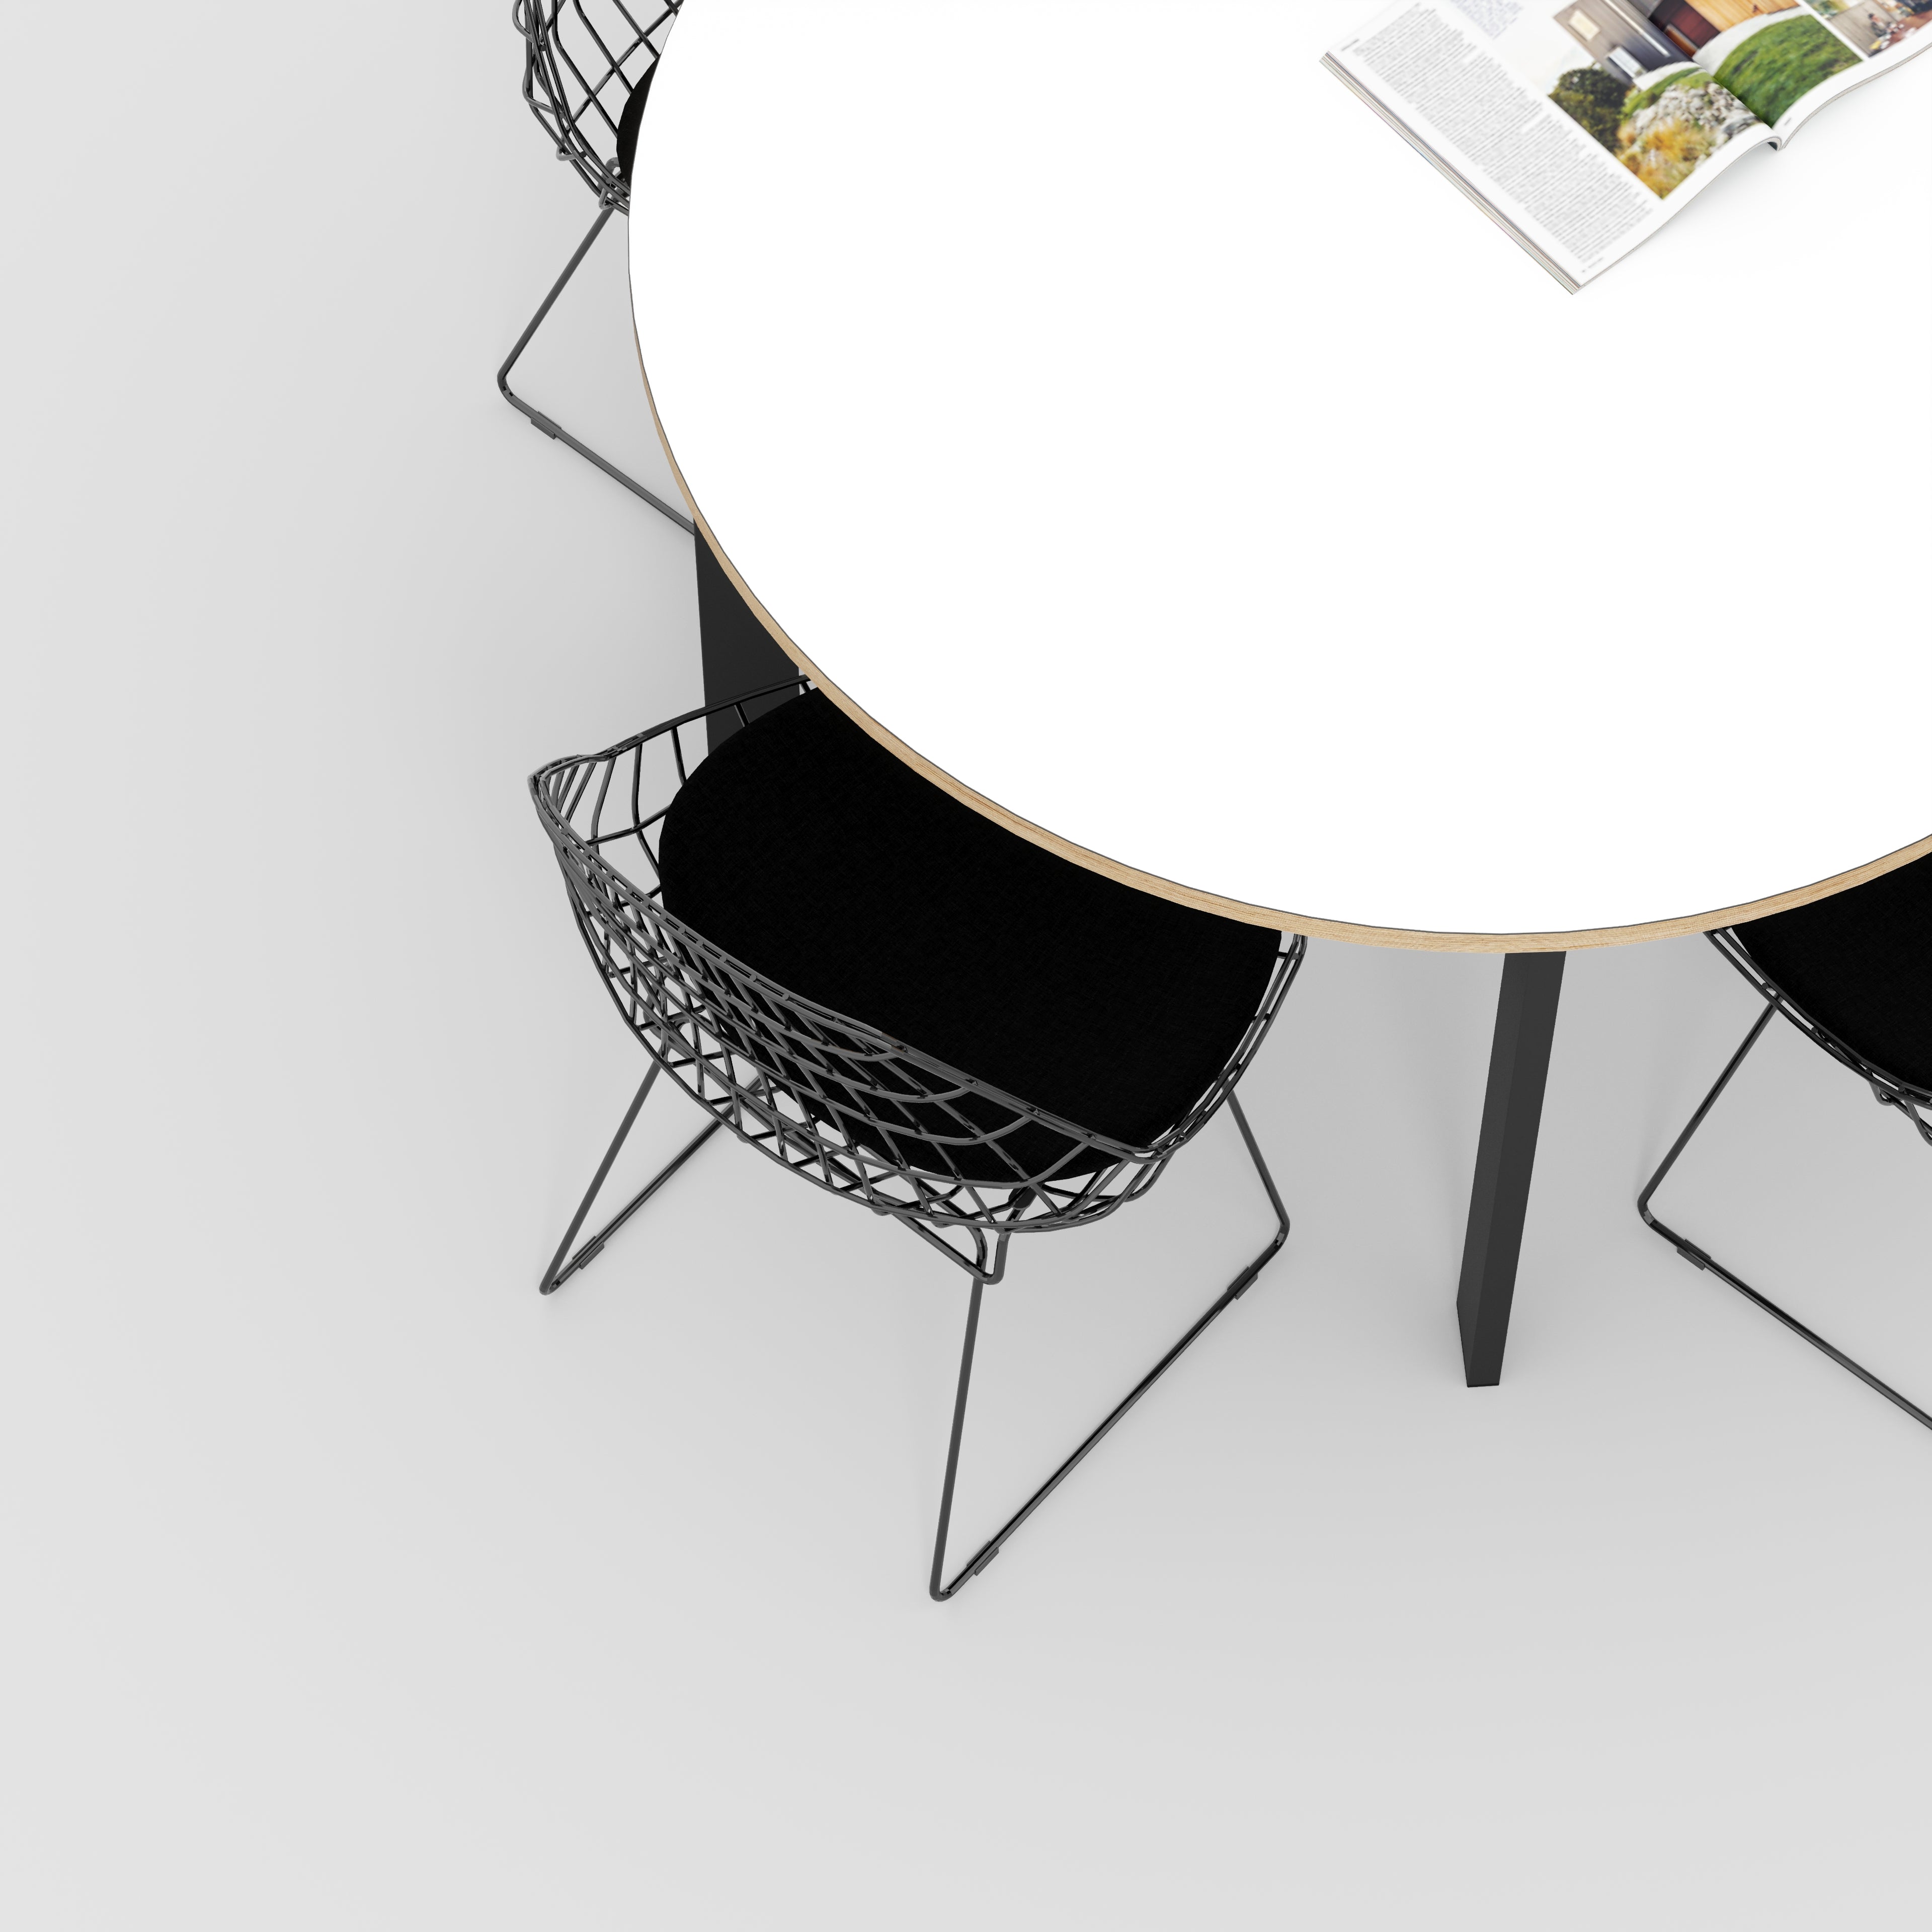 Round Table with Black Rectangular Single Pin Legs - Formica White - 1200(dia) x 735(h)